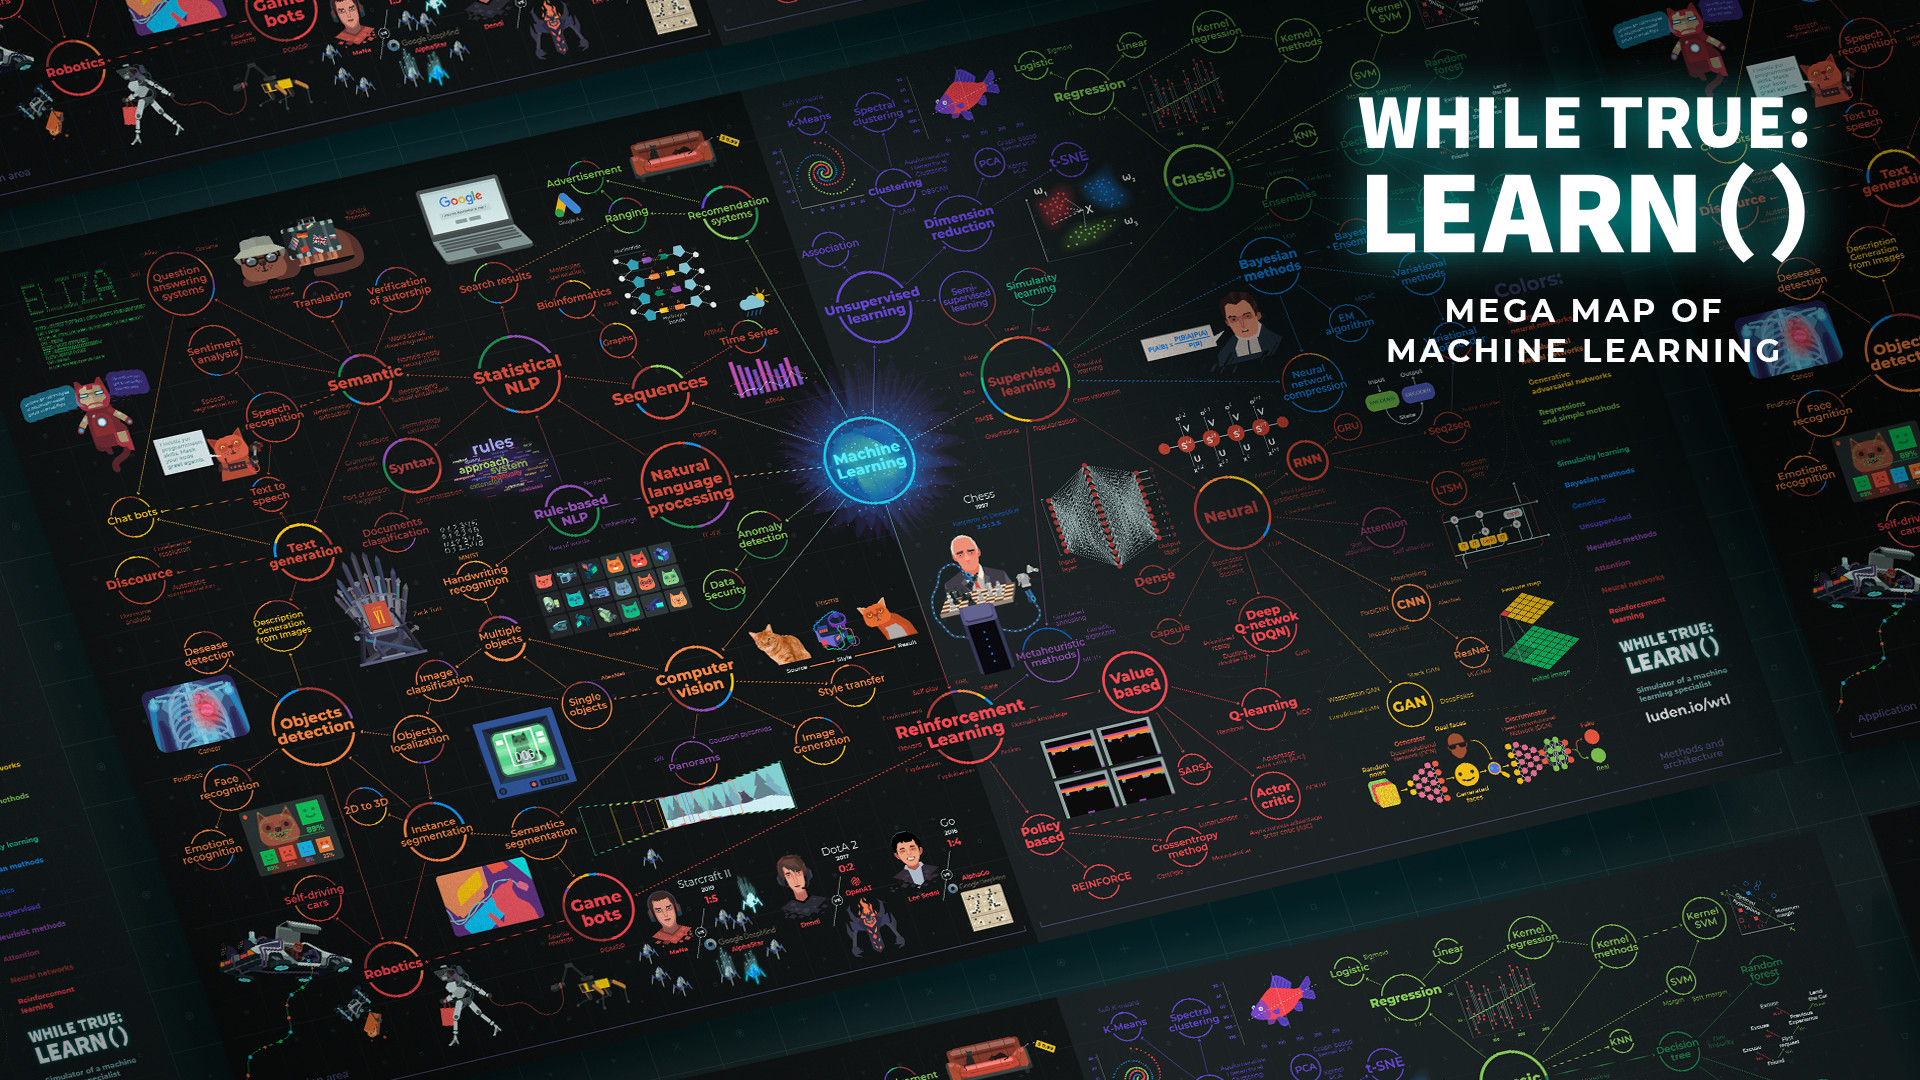 while True: learn() - Mega Map of Machine Learning DLC Steam CD key [USD 2.15]